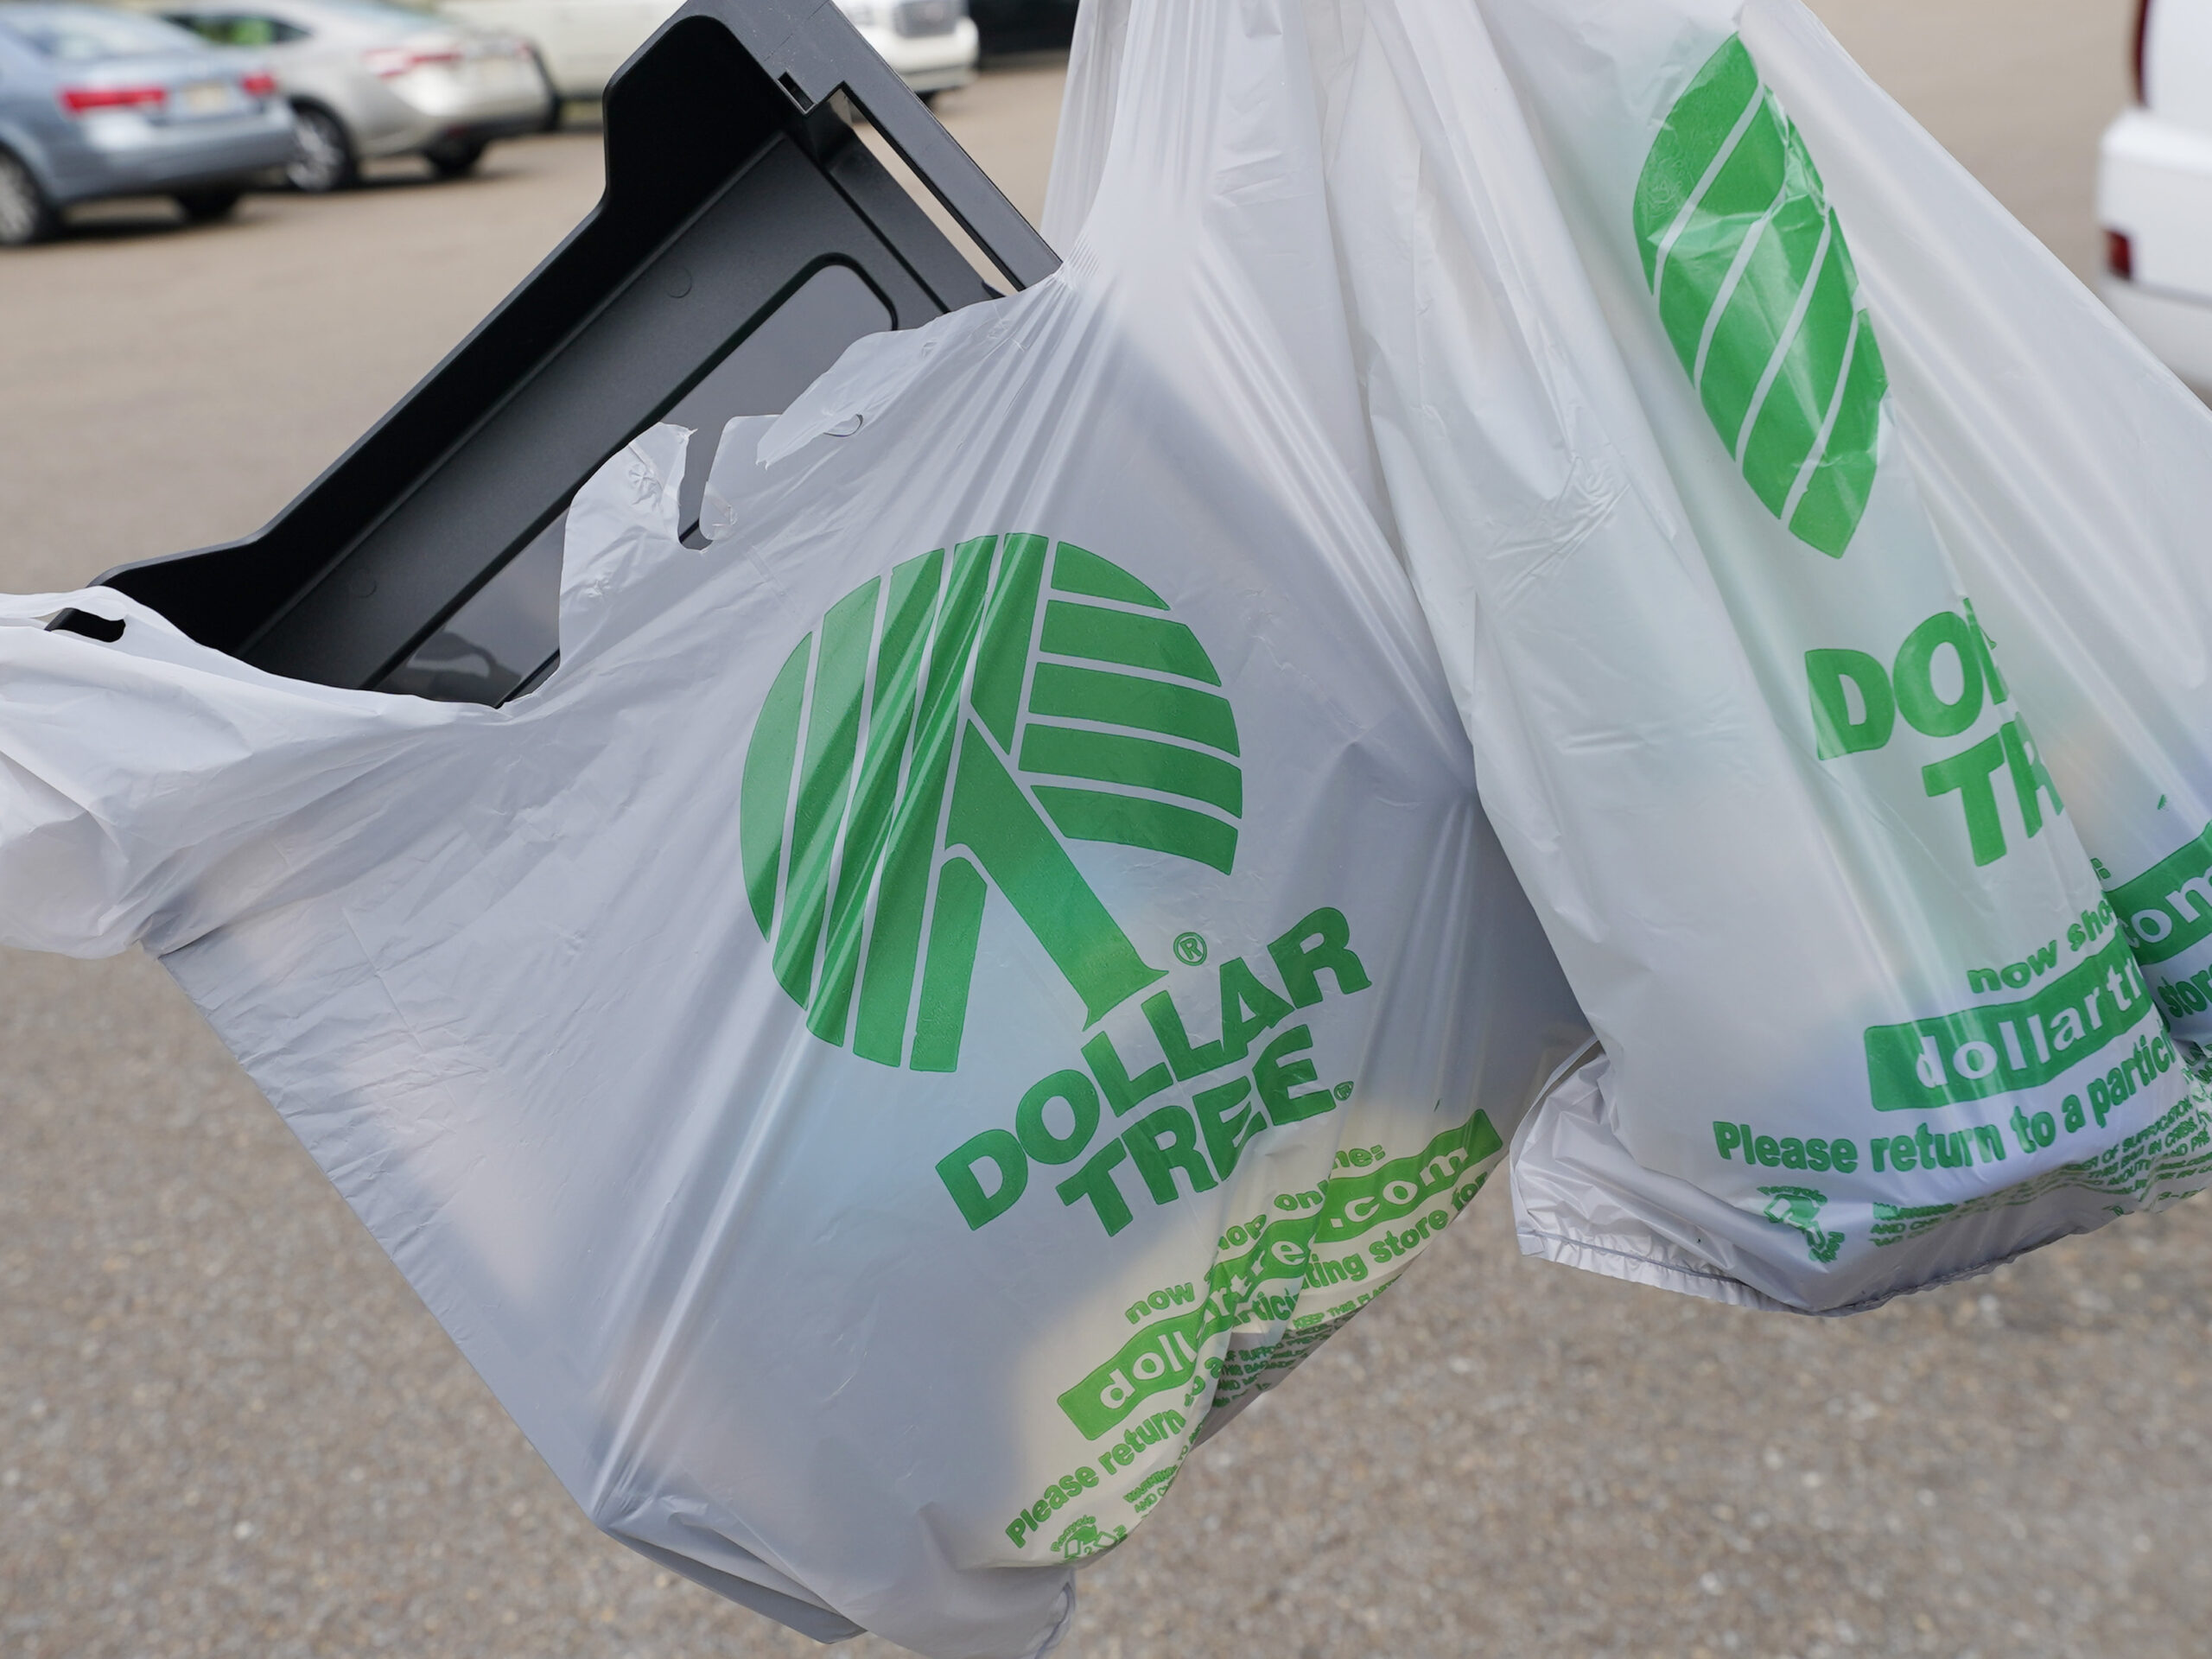 Dollar Tree to close nearly 1,000 stores as it posts a fourth quarter loss